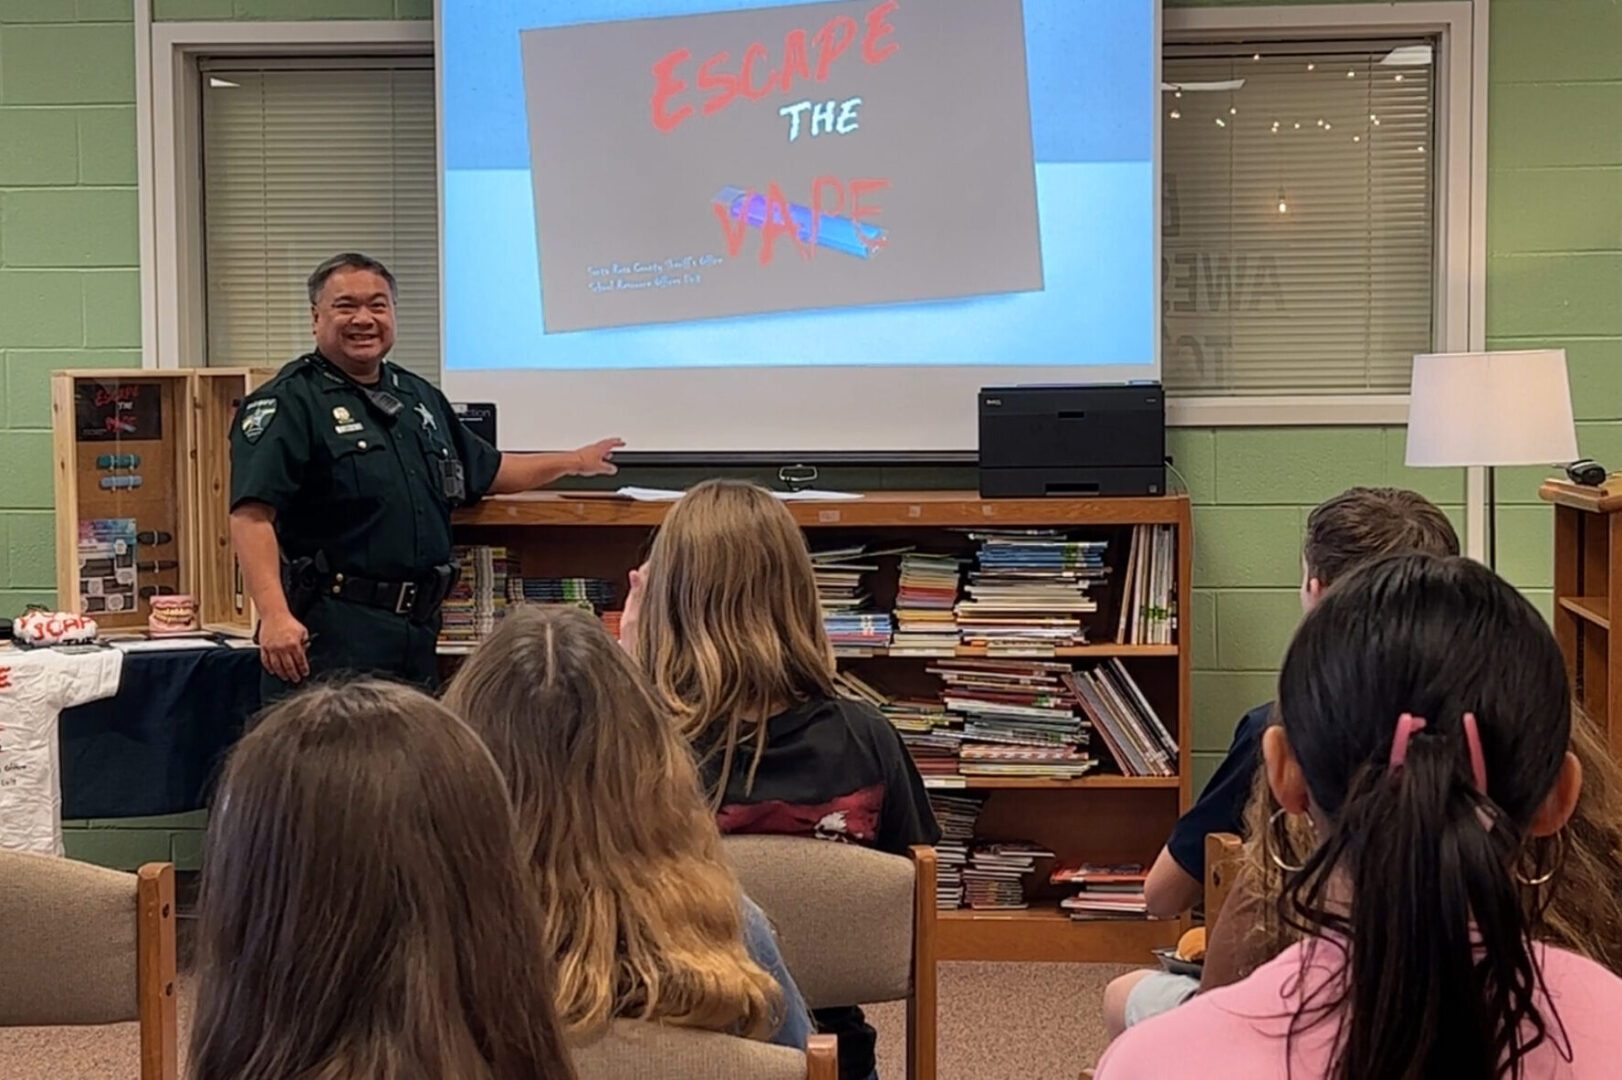 A police officer presenting at a school event, speaking to children who are seated, with a projection screen displaying "escape the vape" in the background.